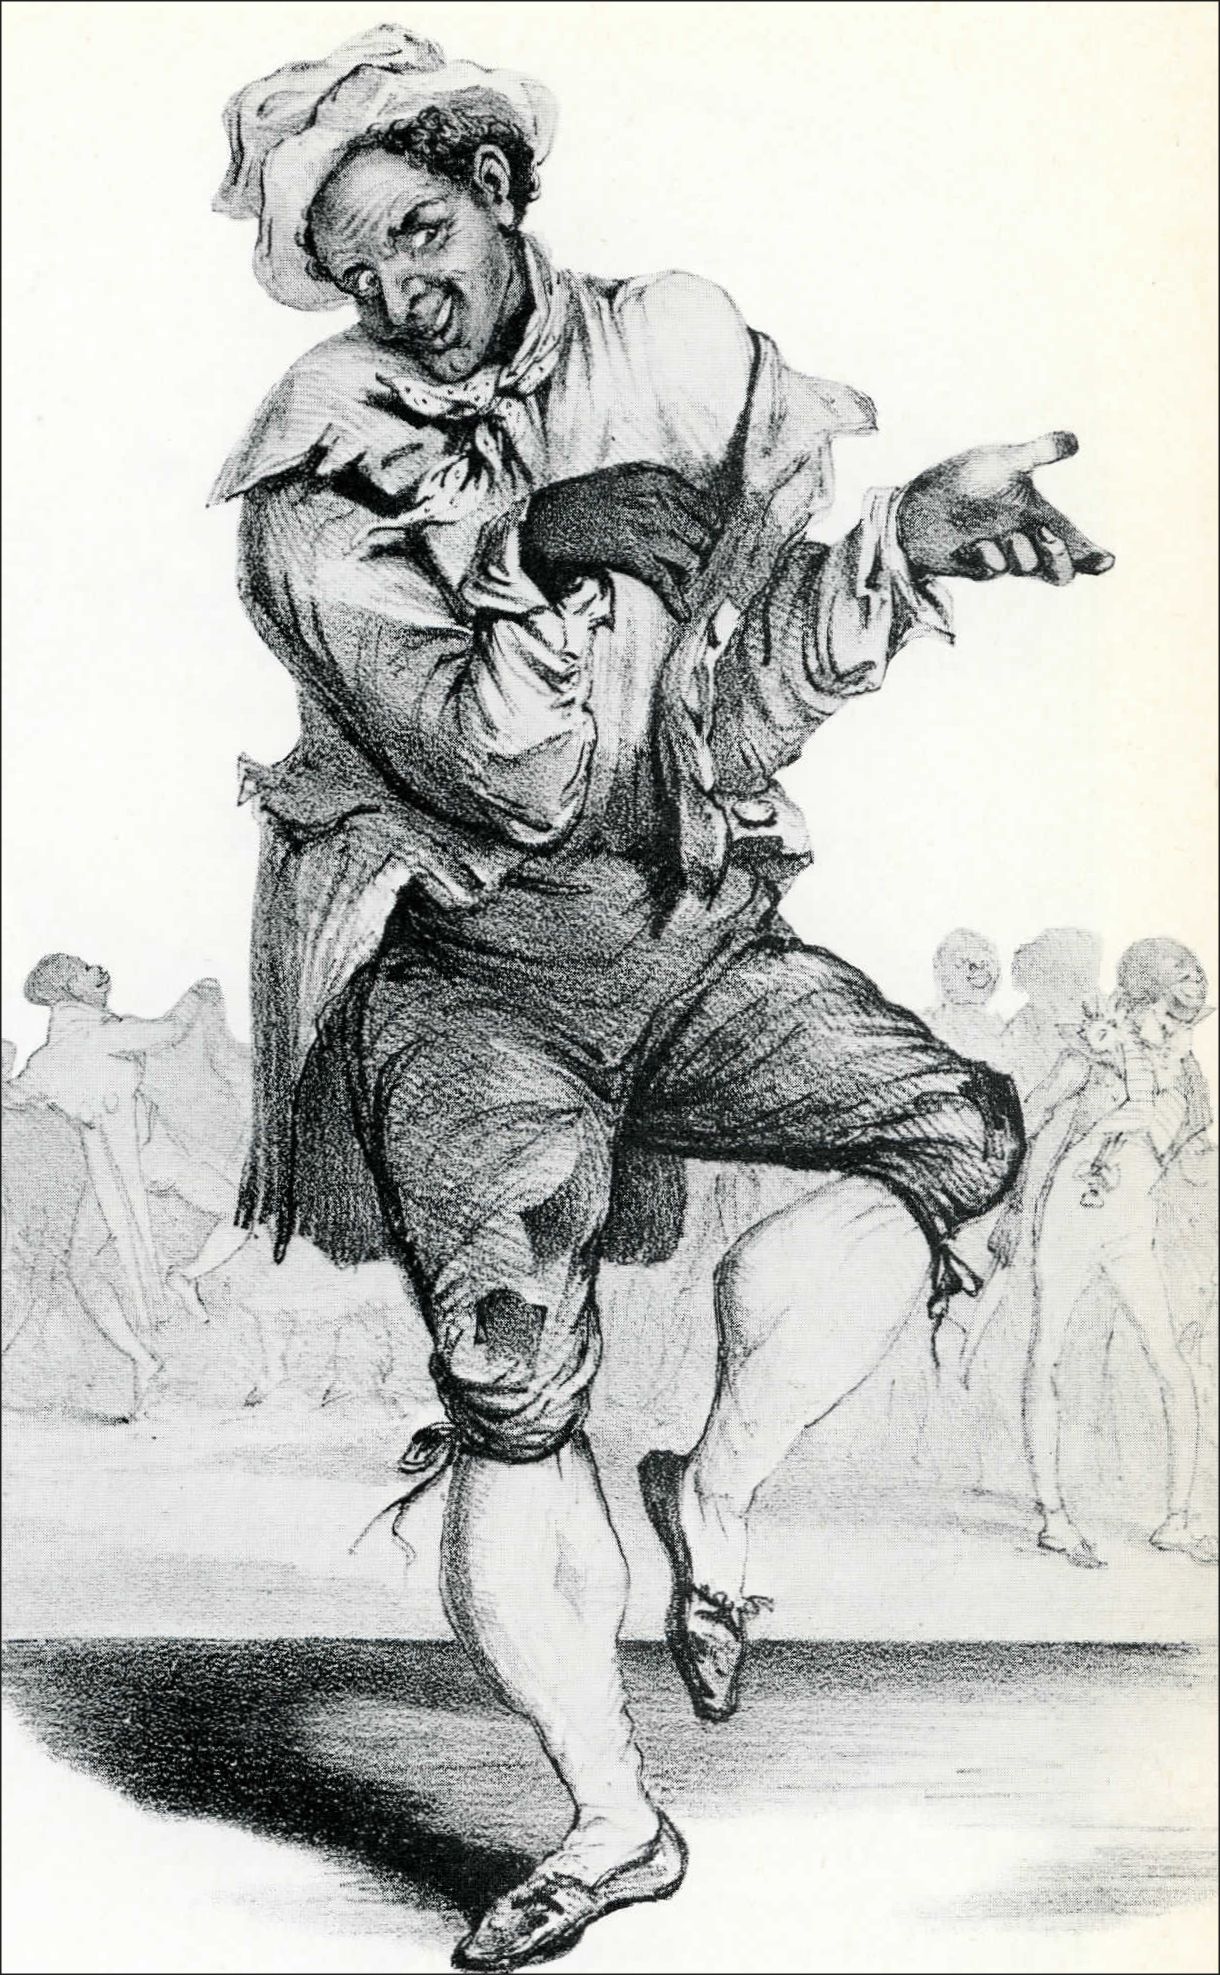 Thomas Rice was one of the very first American stage stars. His fame spread worldwide, this lithograph shows him in London, and writer Bayard Taylor even claimed to have heard "Jump Jim Crow" sung by street performers in India.